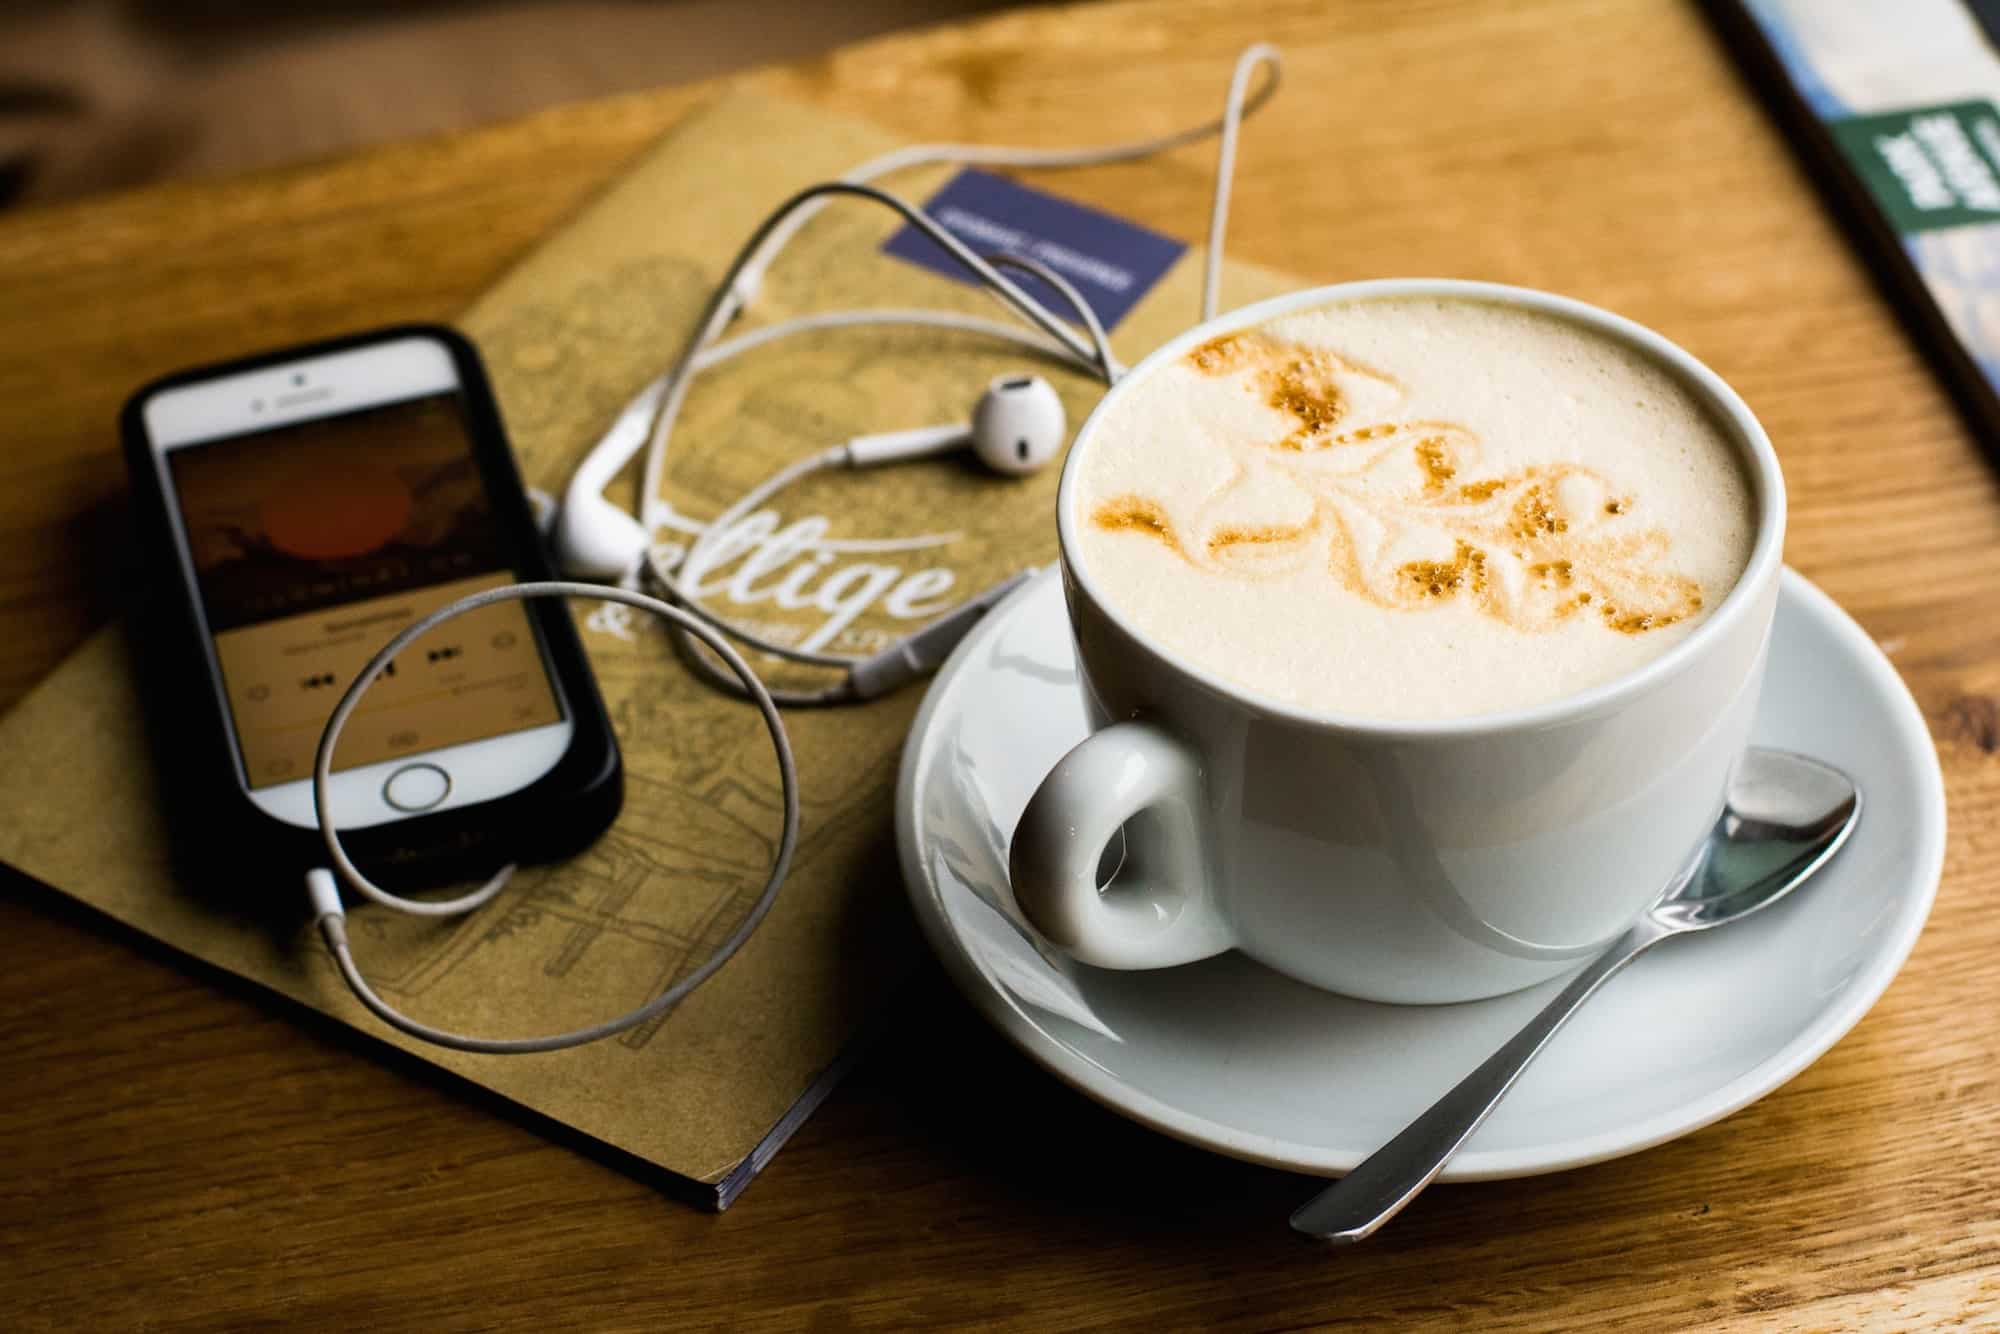 HiP Paris Blog rounds up the top French podcasts to enjoy while you have a coffee, like this creamy Cappuccino on a wooden table, next to a phone with a podcast on the screen.